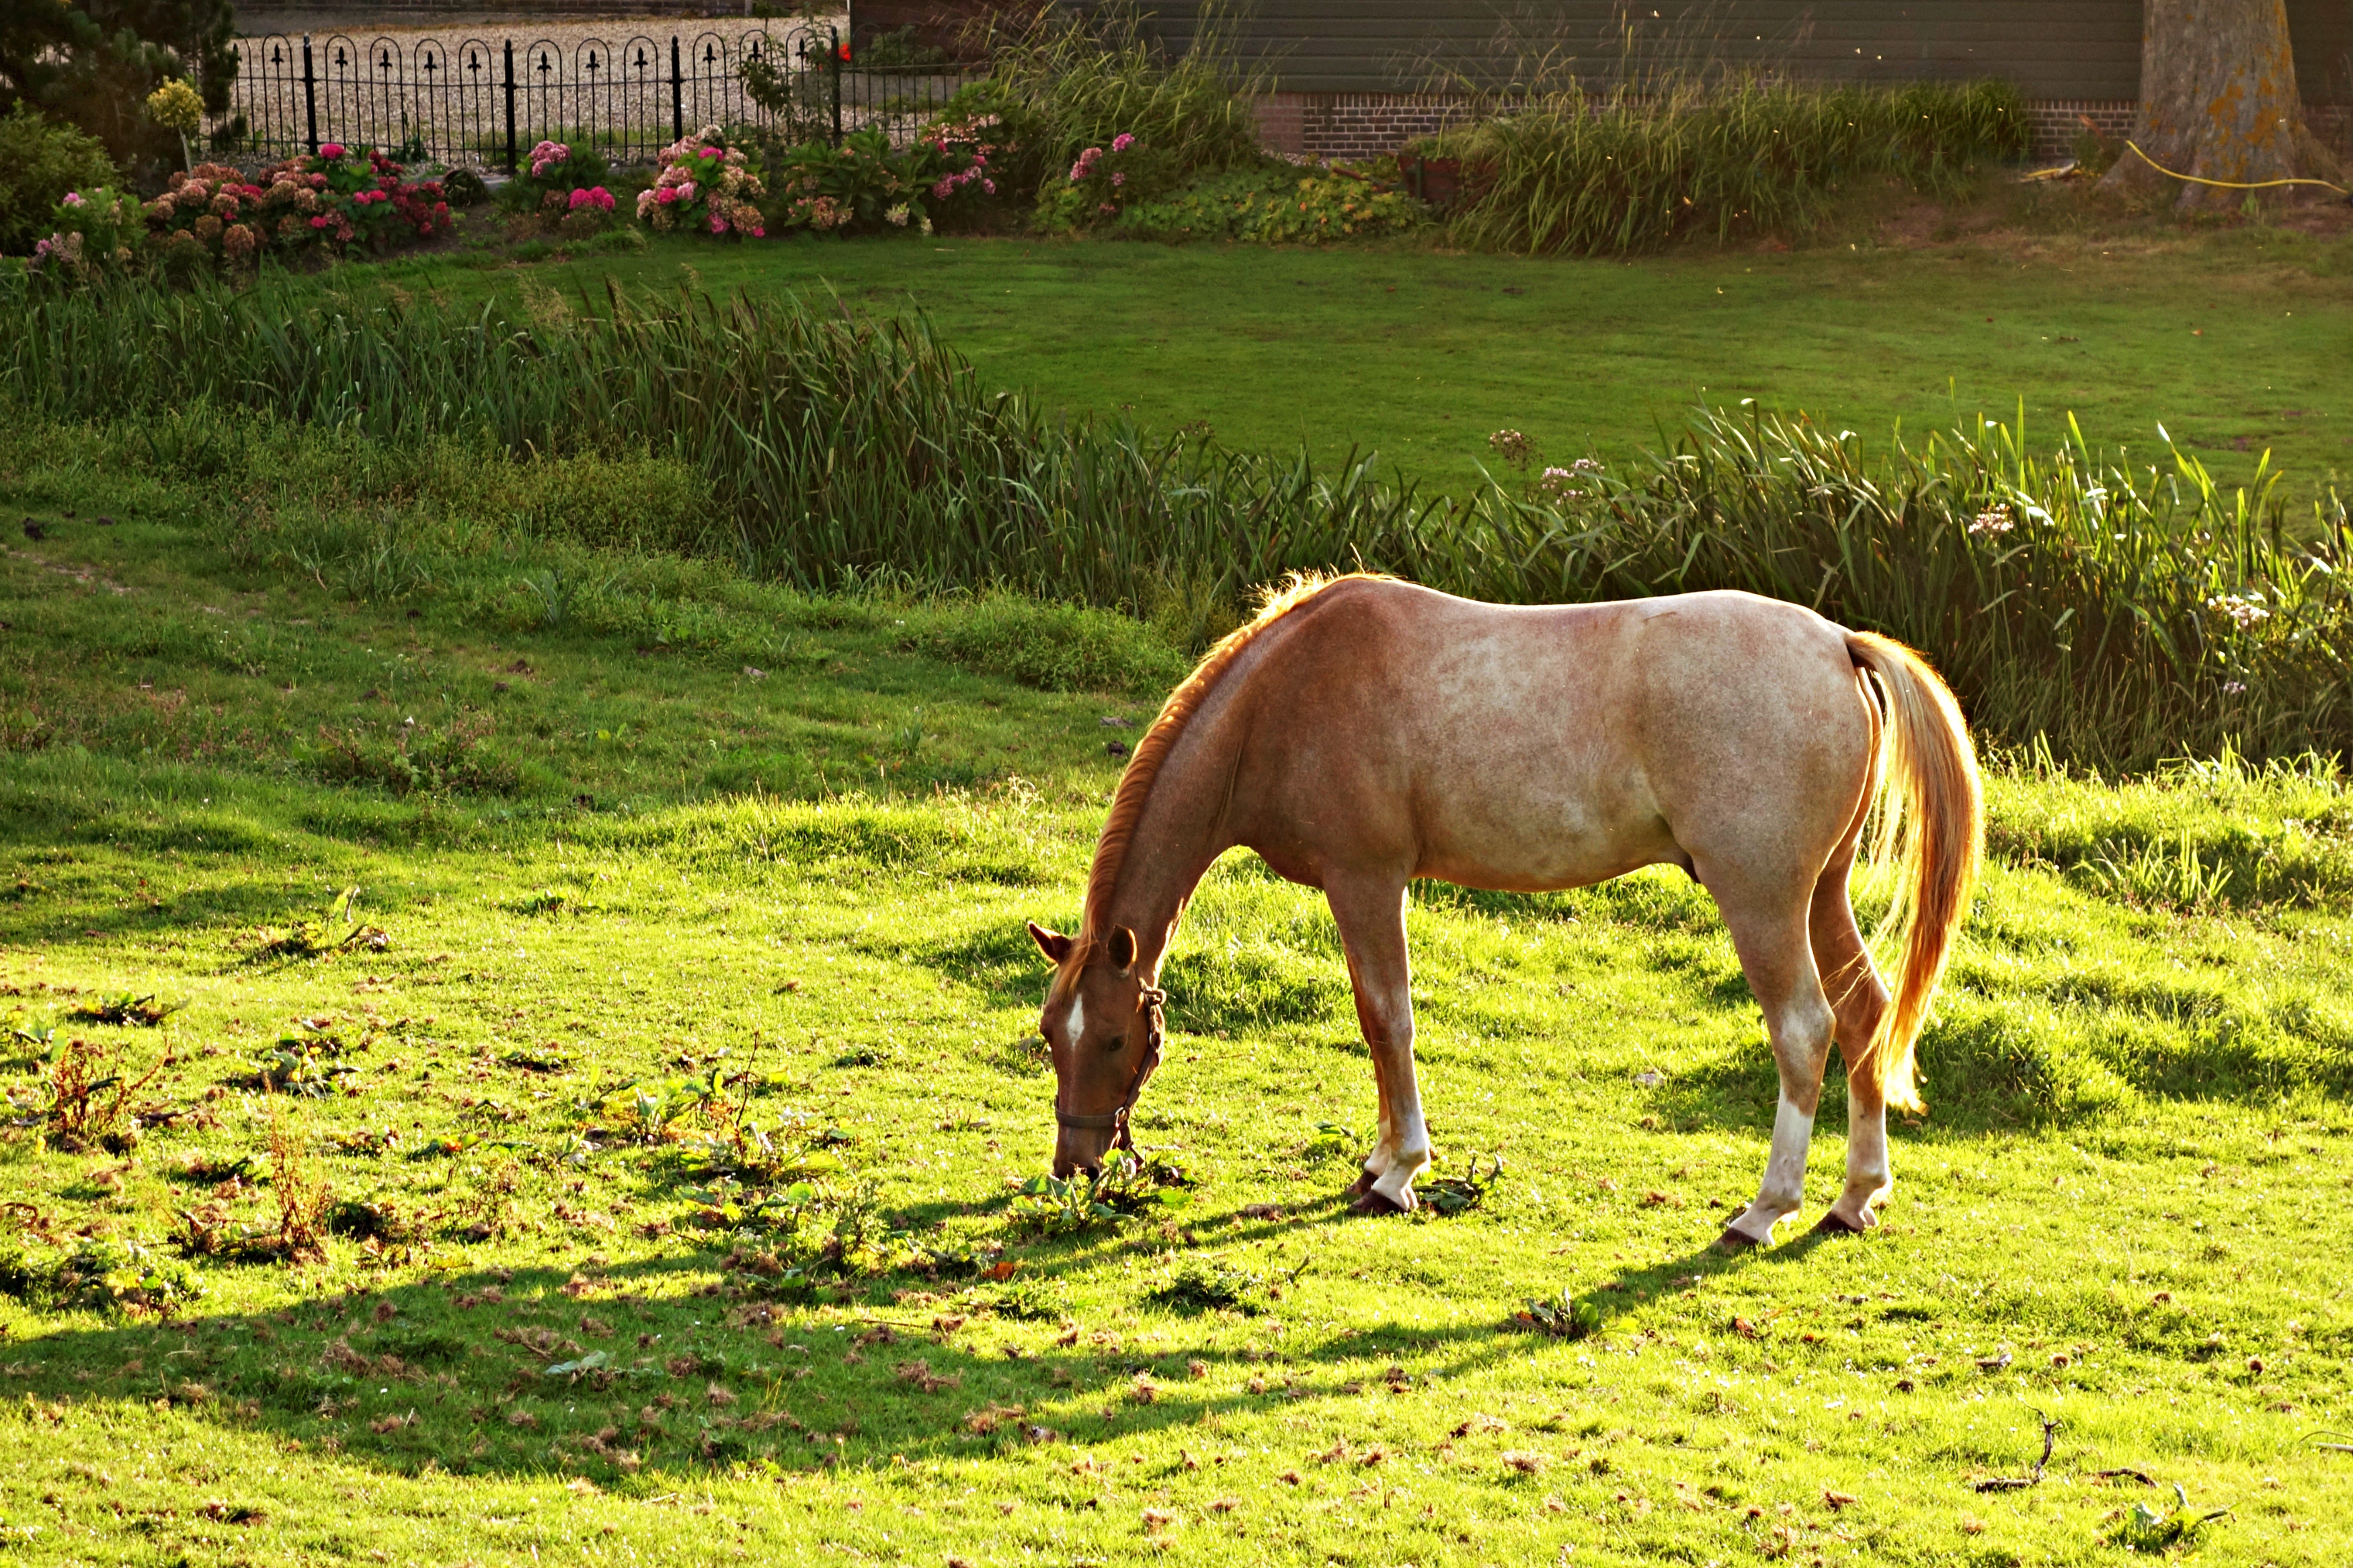 Brown and white horse eating green grass during daytime photo